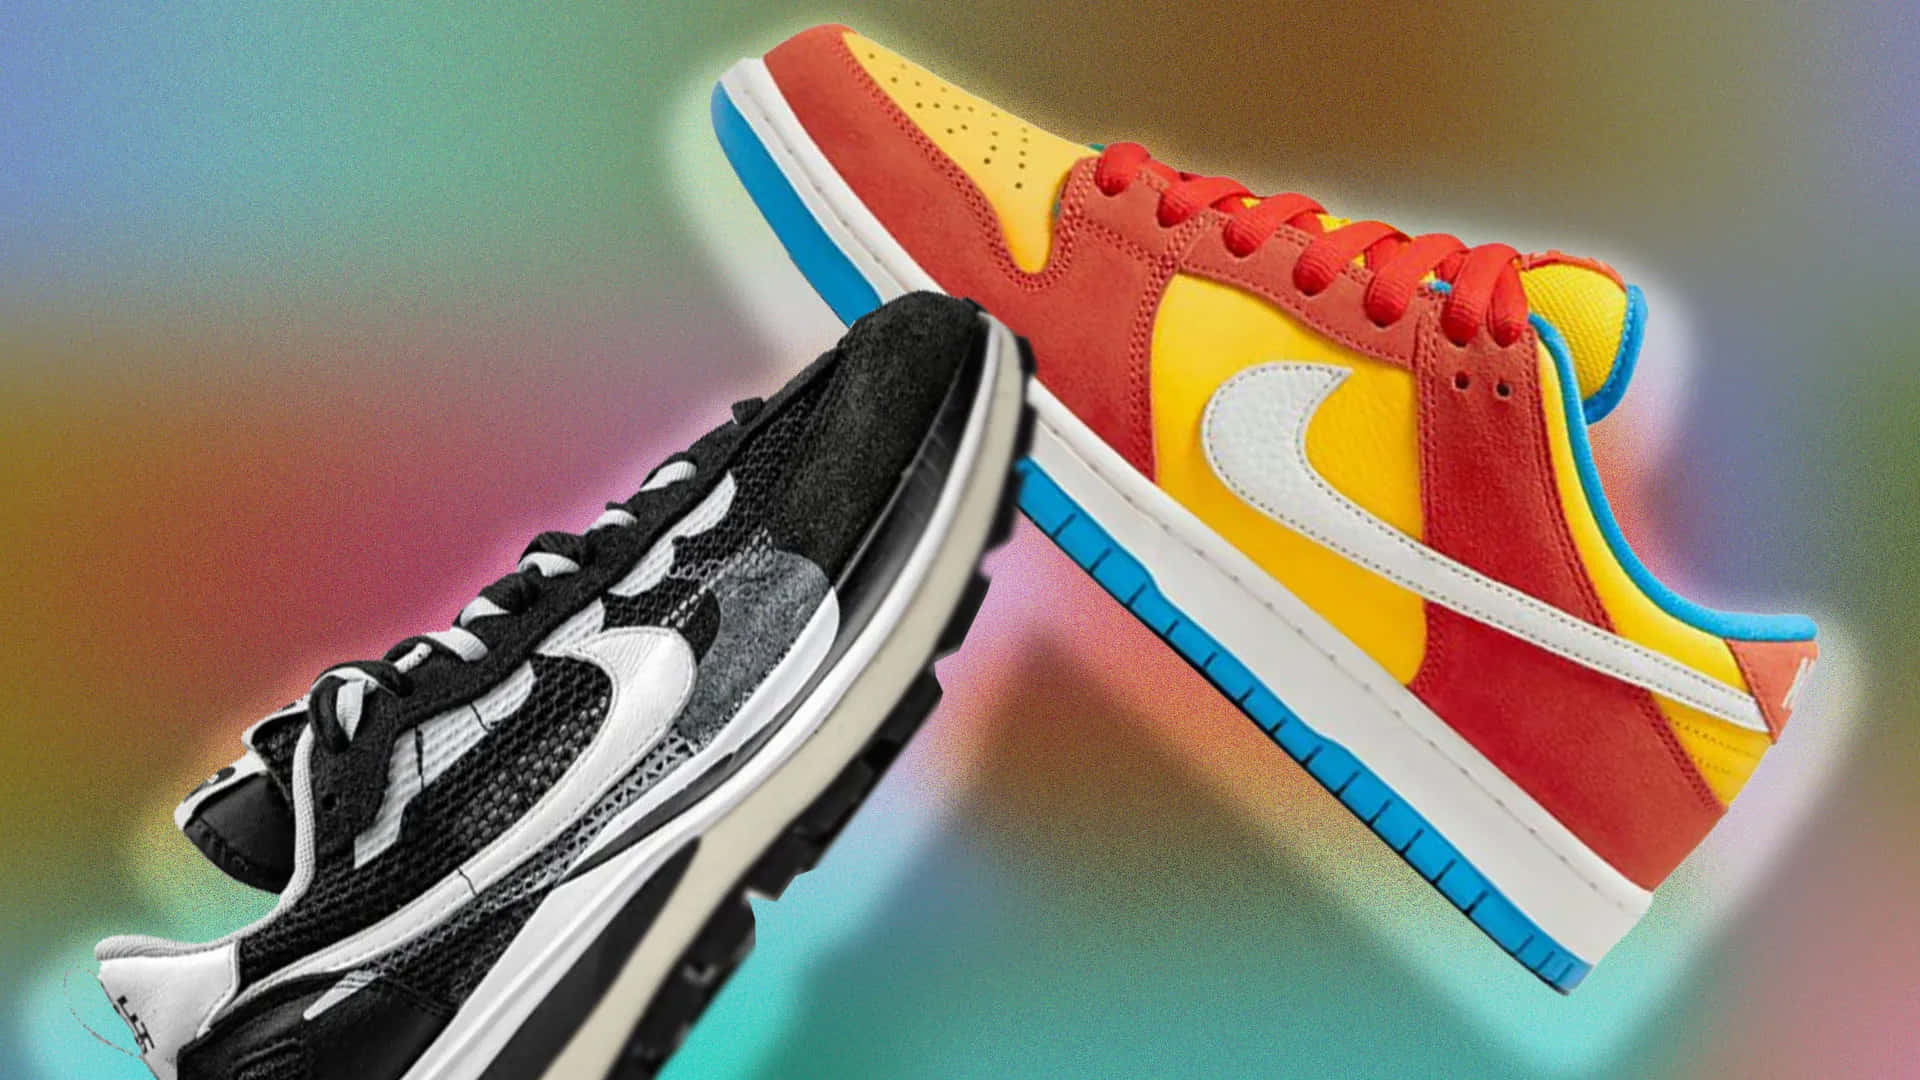 Nikesb Dunk Low Sb Dunk Low Sb Dunk Low Sb Dunk Low Would Be Translated To 